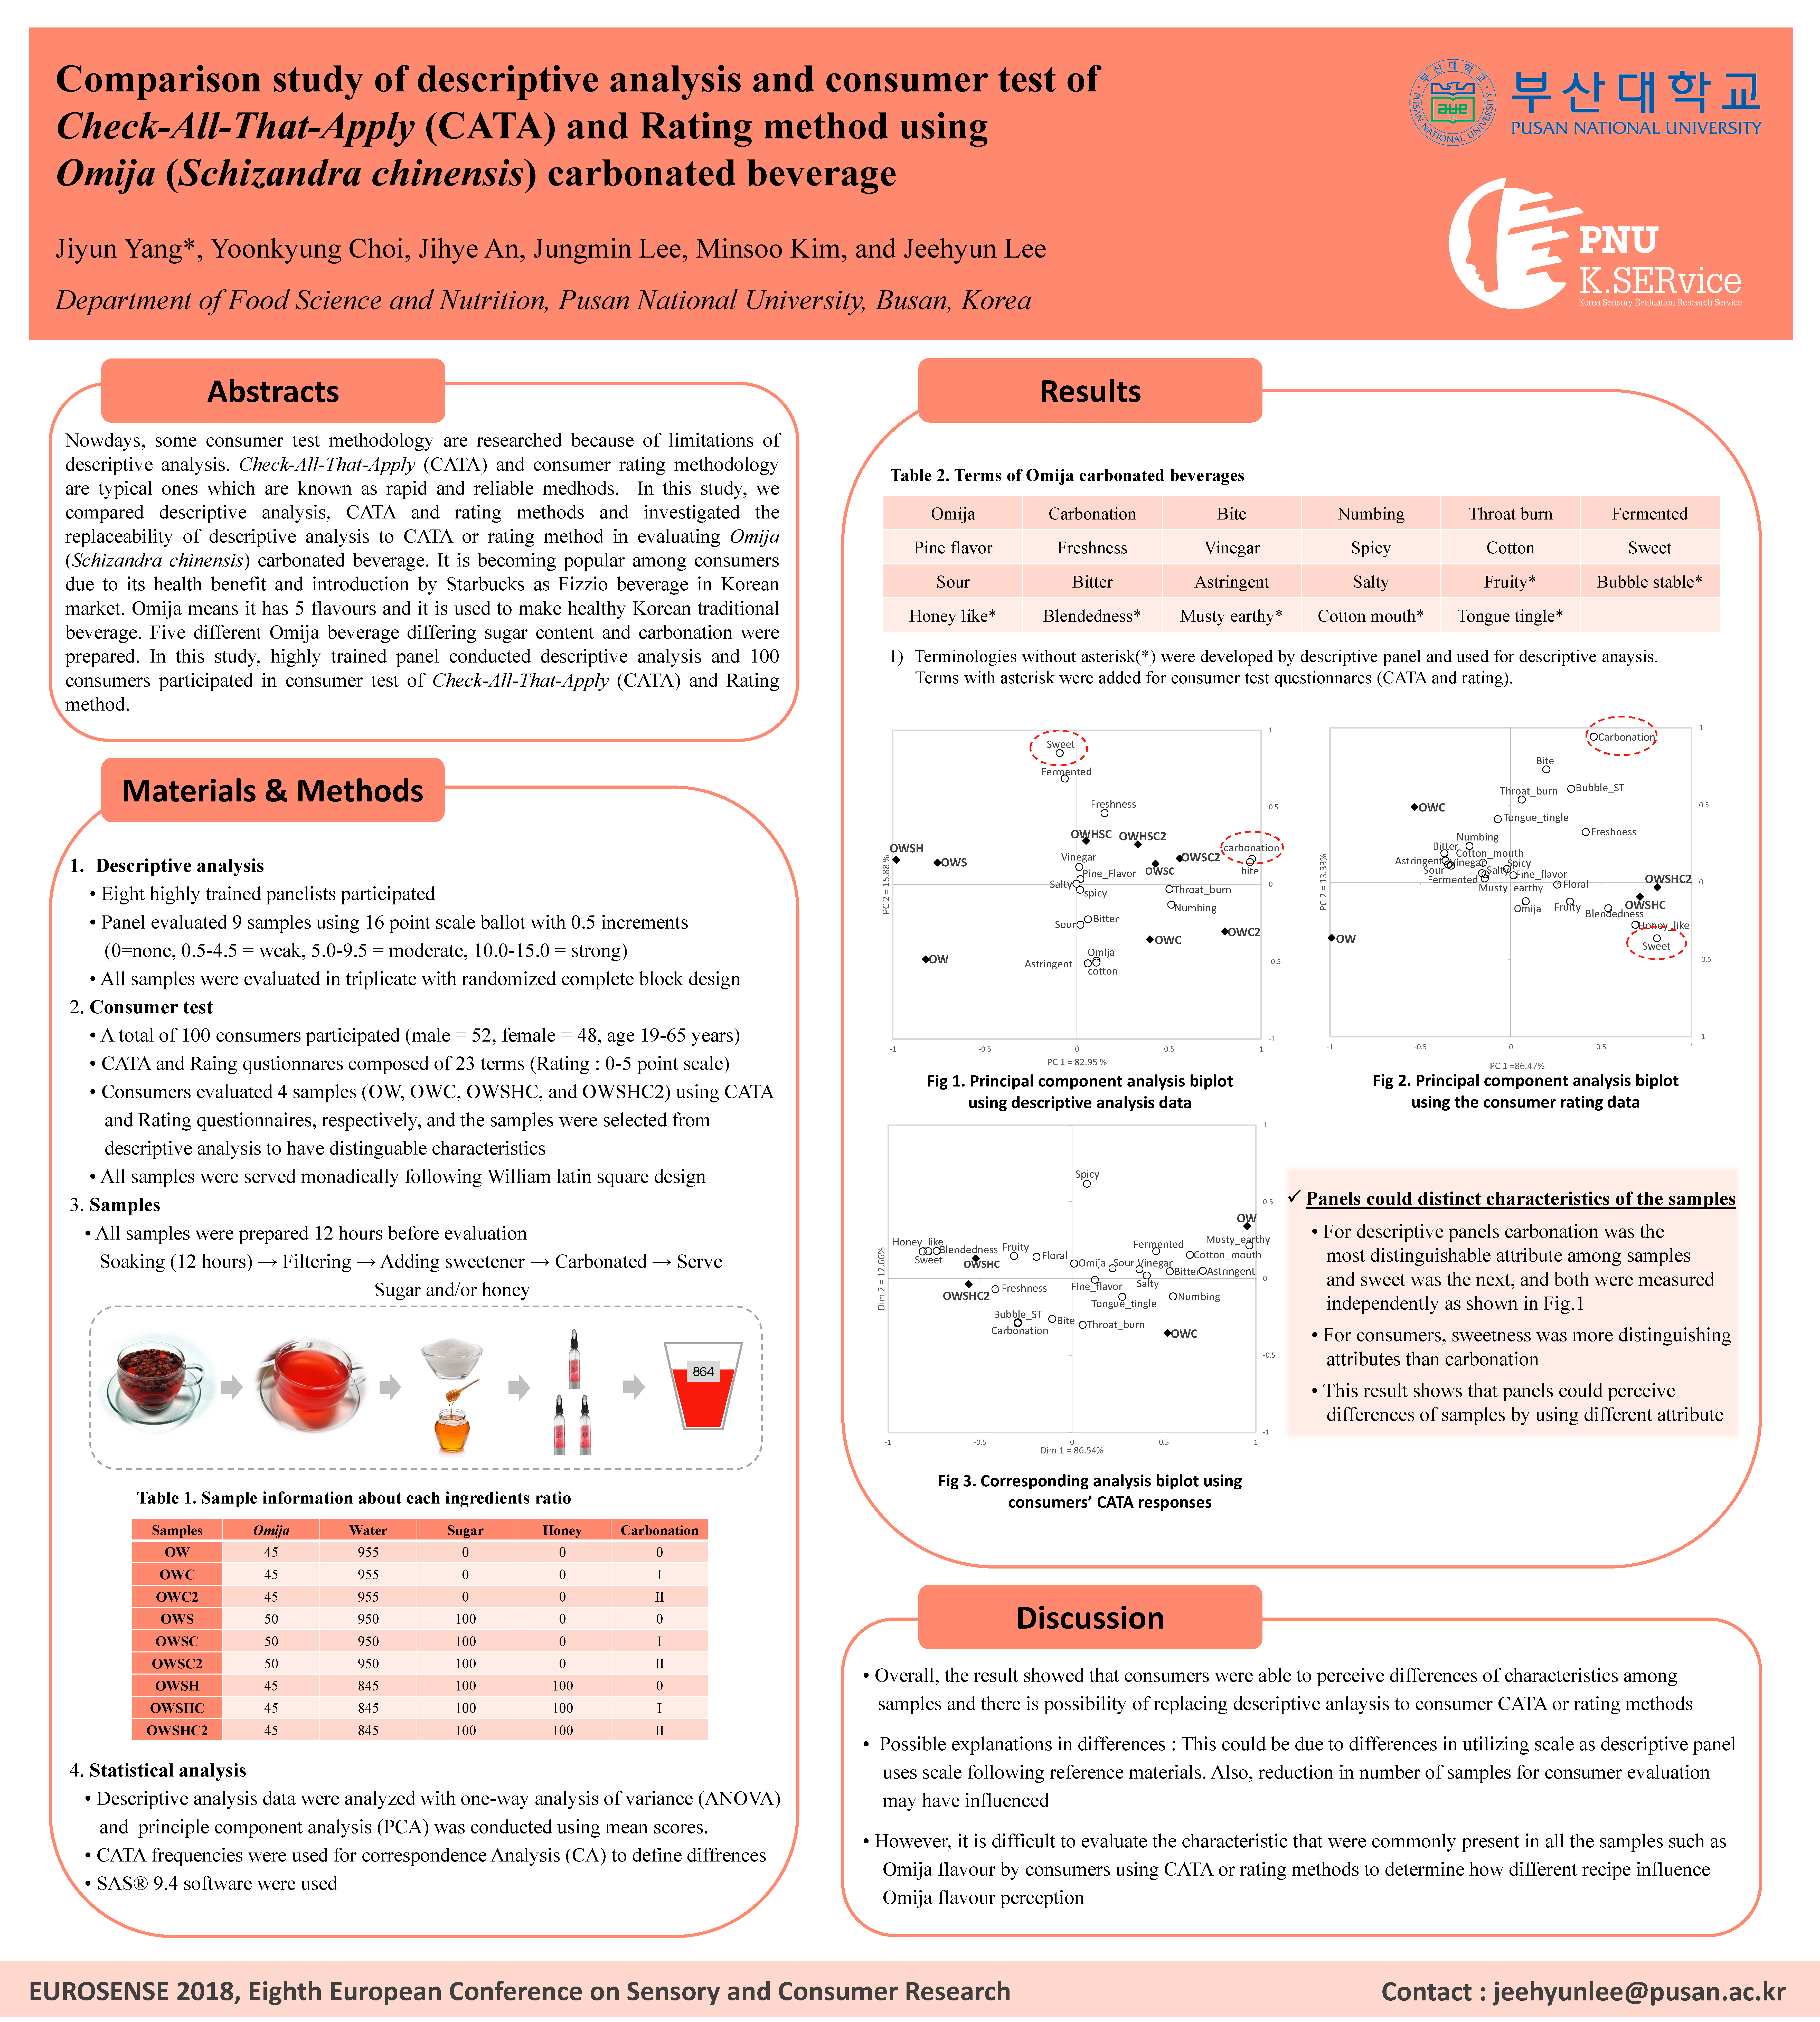 [2018 Eurosense] Comparison study of descriptive analysis and consumer test Comparison study of Check -All -That -Apply (CATA) and Rating method using Rating method using [2018 Eurosense] Omija carbonated beverage(CATA)_Jiyun Yang.png